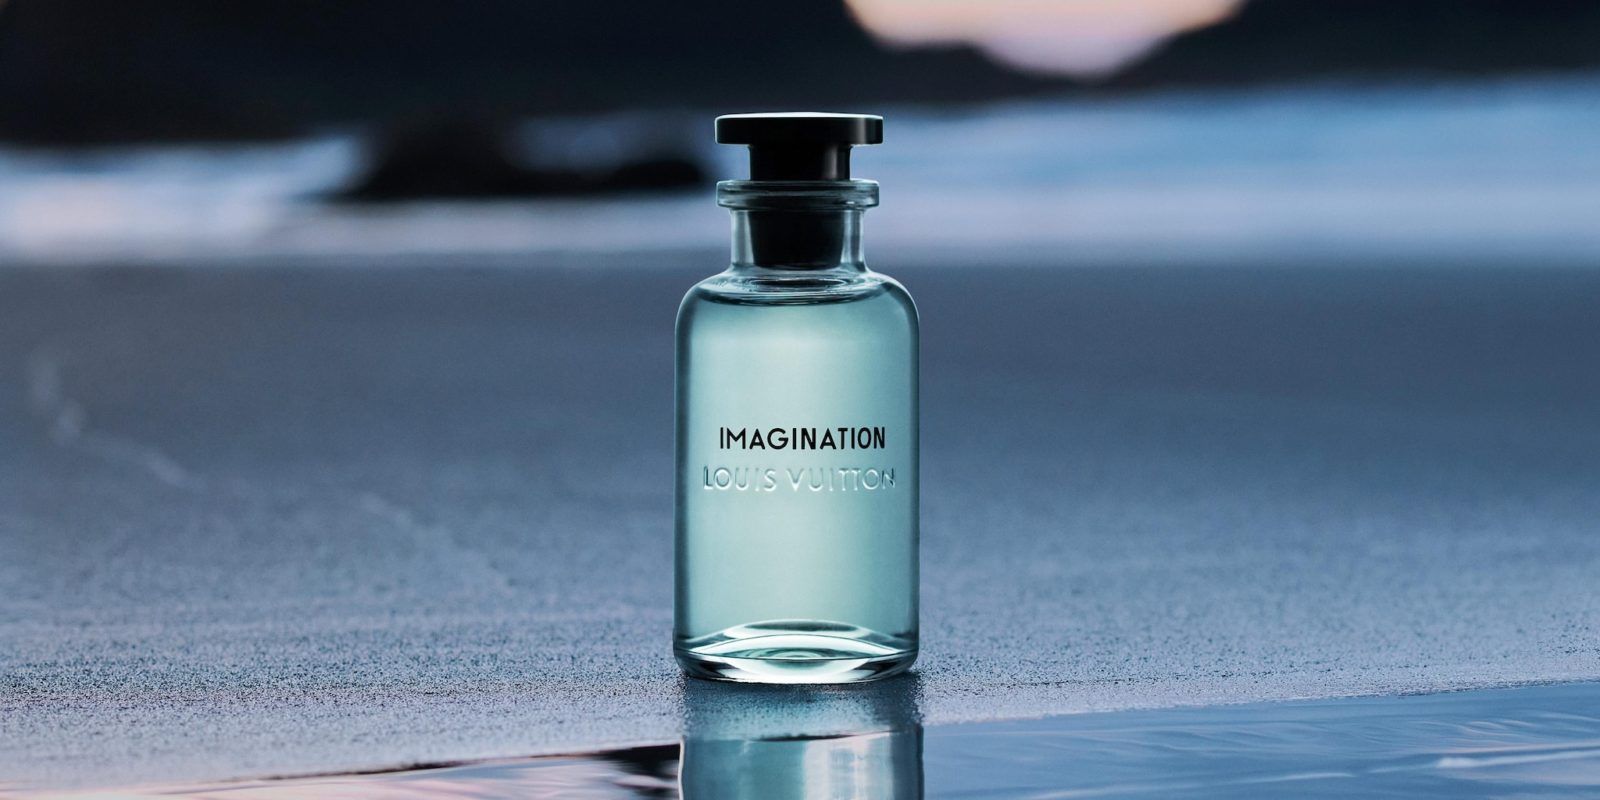 It smells good in here! Prime fragrances for men according to their zodiacs